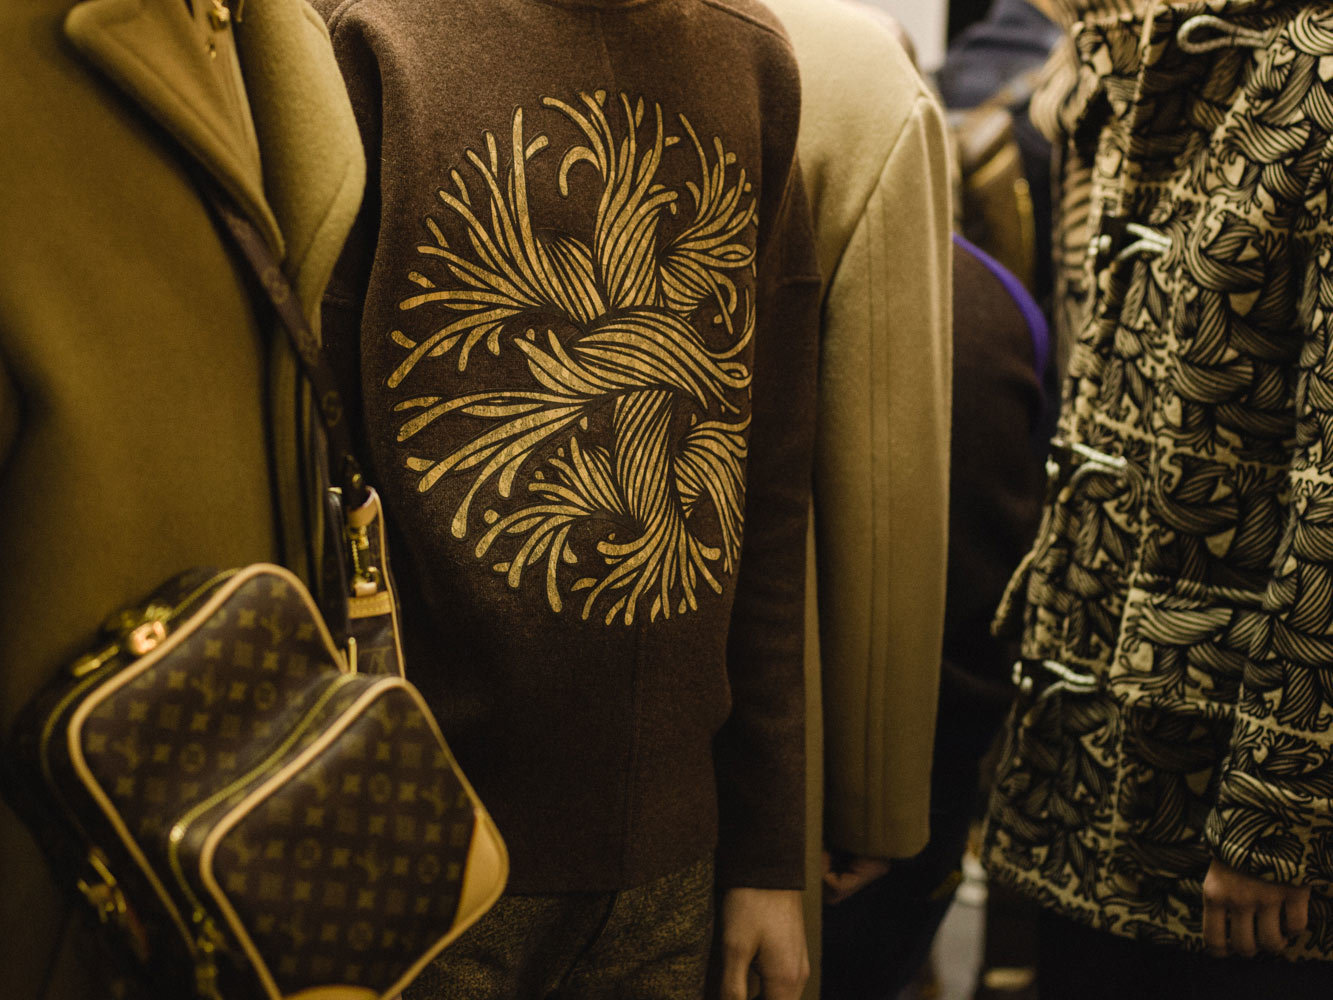 In LVoe with Louis Vuitton: The Christopher